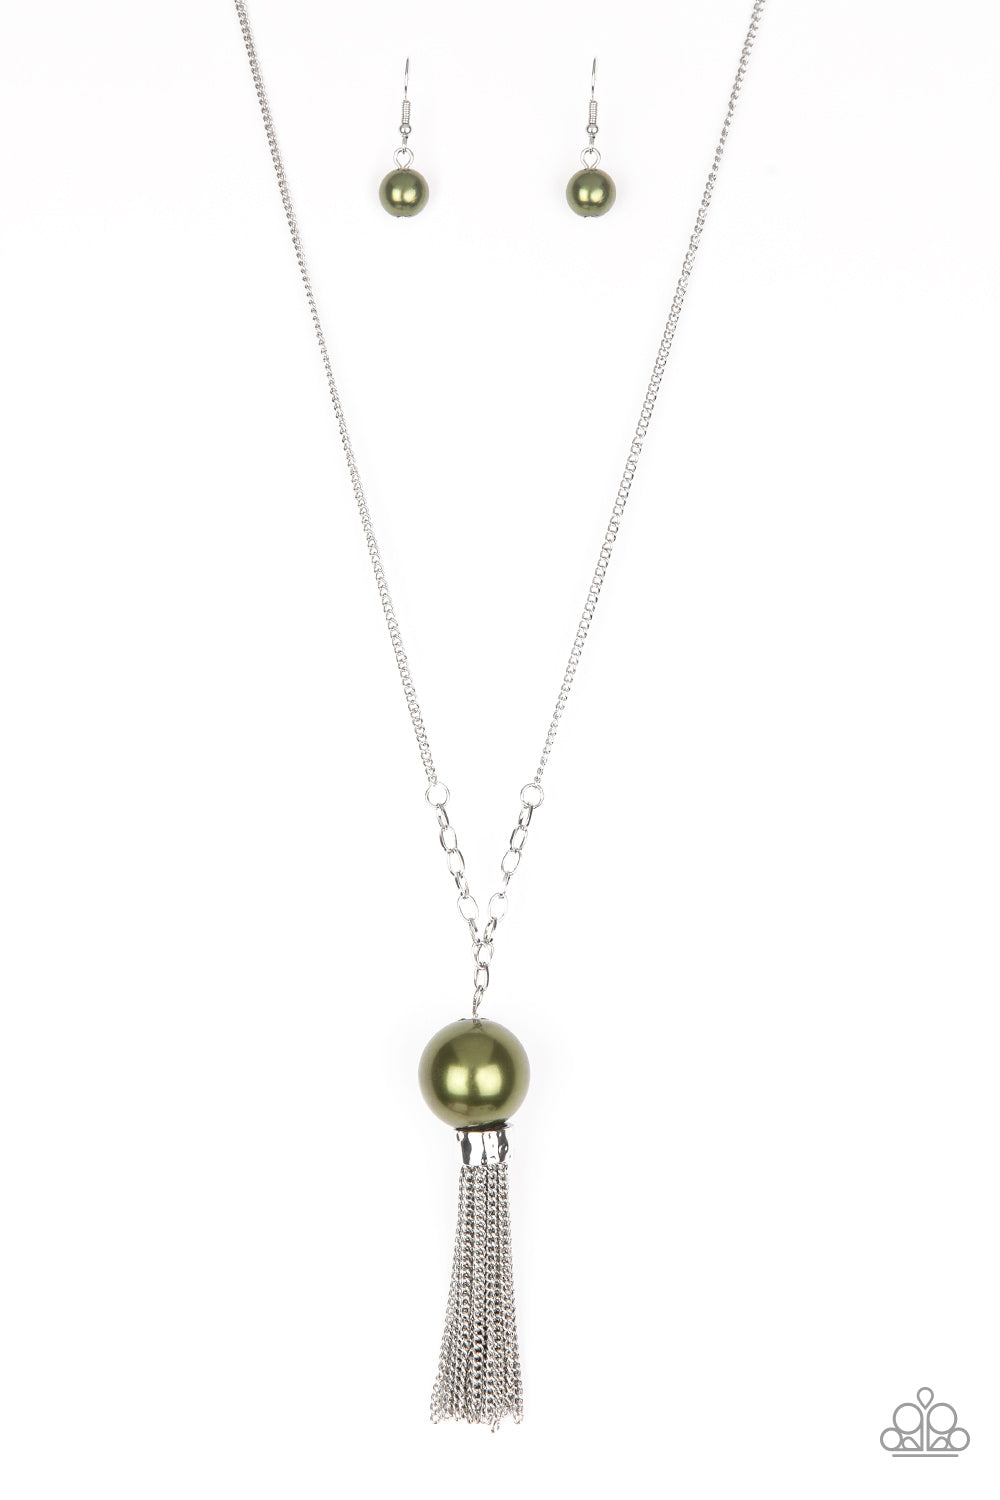 Paparazzi "Belle Of The BALLROOM" - Olive Green Pearly Bead Tassel Necklace